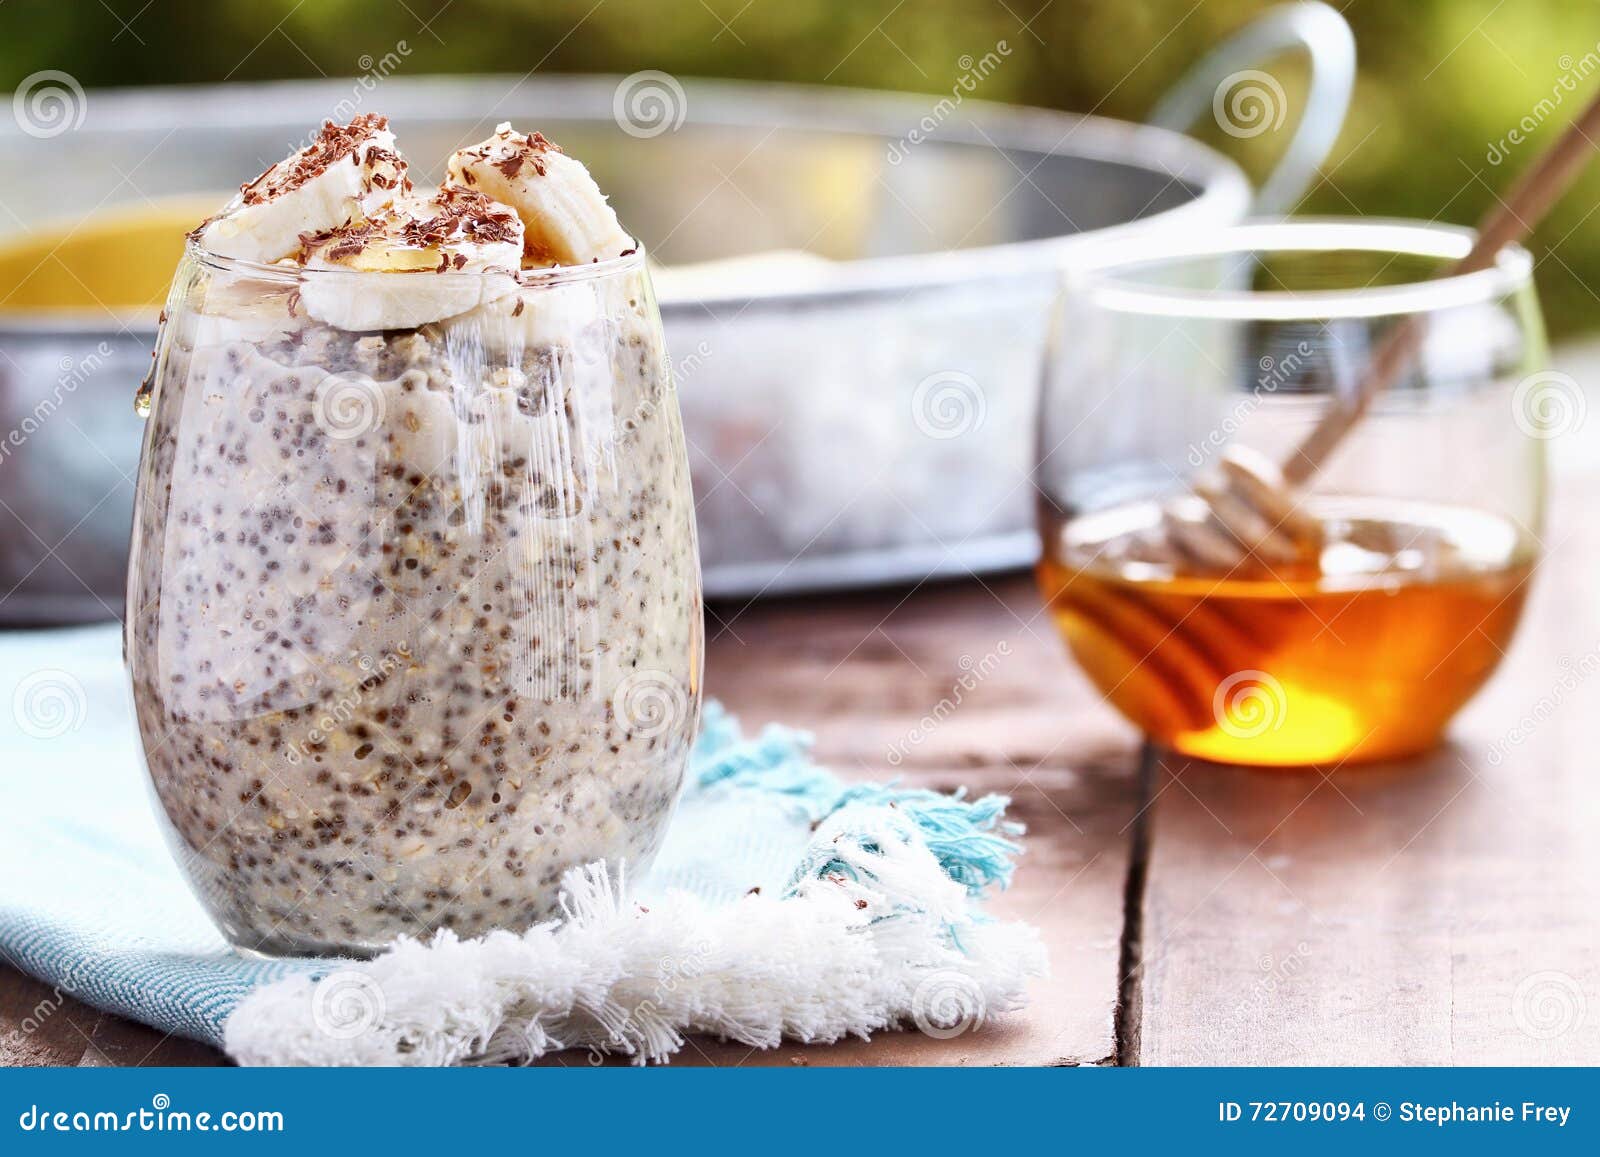 overnight oats and chia seeds